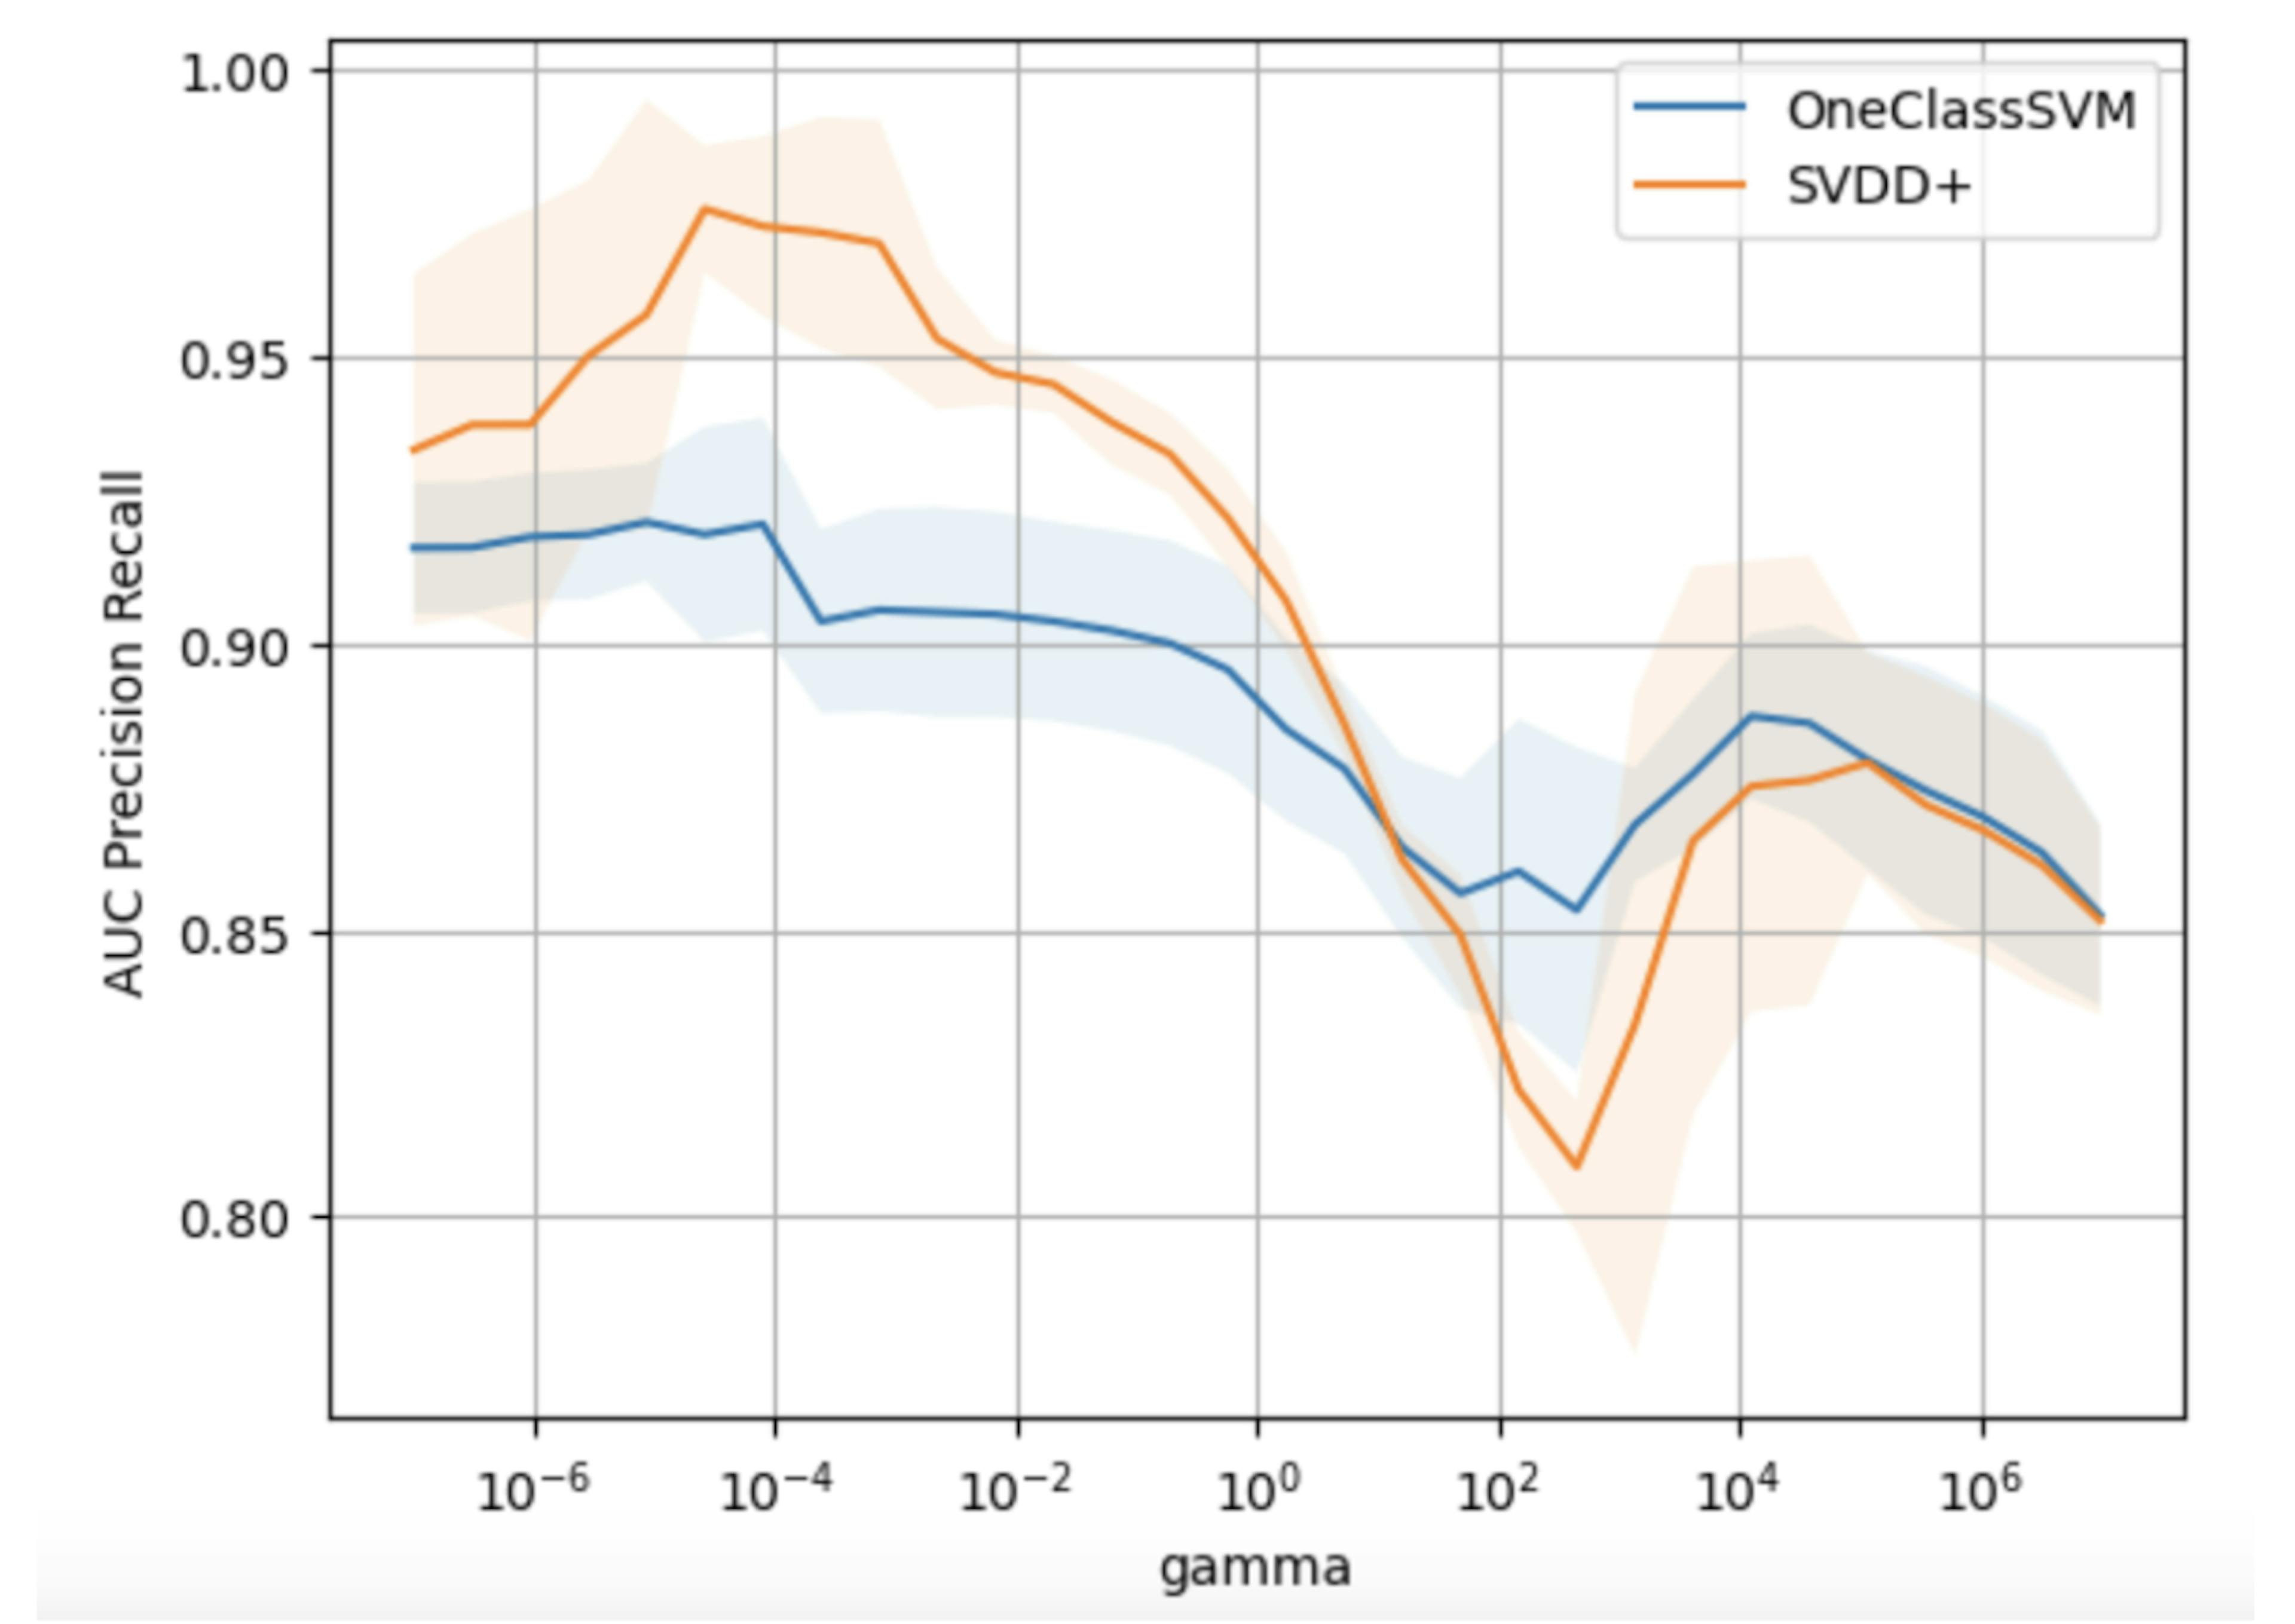 In the graphic, we show the performance for different original kernel widths. The idea was to show how privileged information can reduce overfitting. We can see that kernel width 10e-4 is already very small, leading to overfitting the model, which used only basic features. 